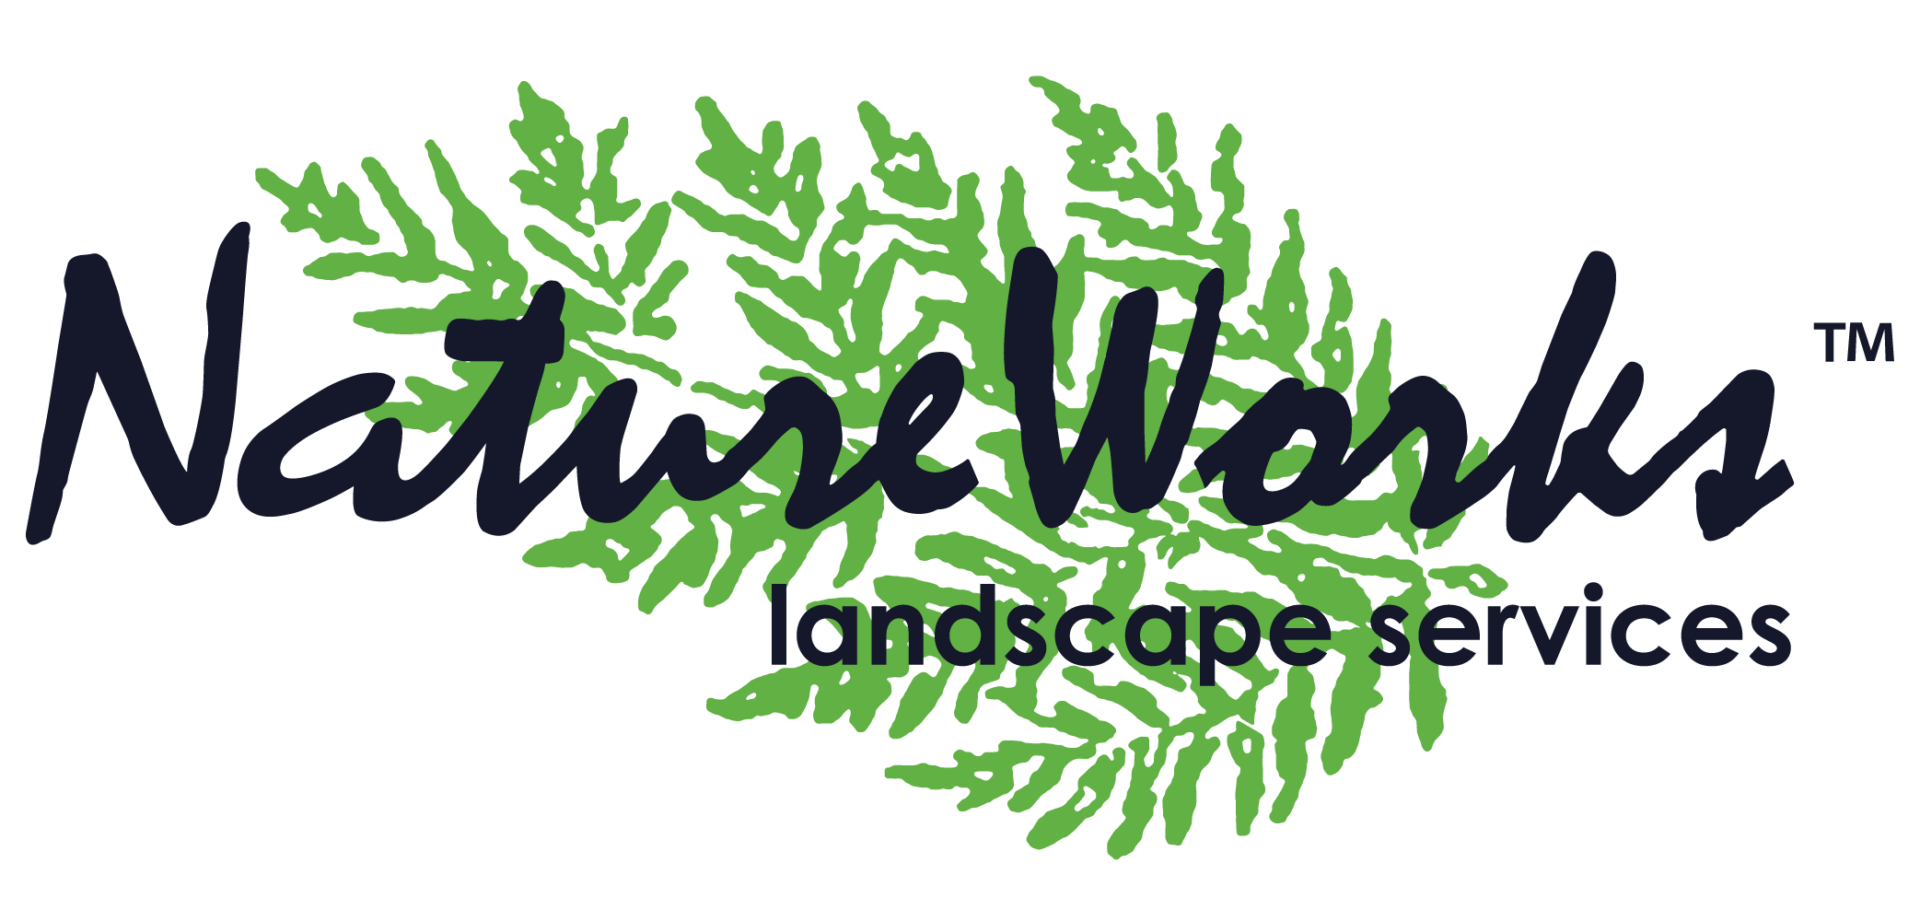 This is a logo featuring stylized green leaves forming a circle around the words "NatureWorks landscape services" in navy blue, with "TM" indicating a trademark.